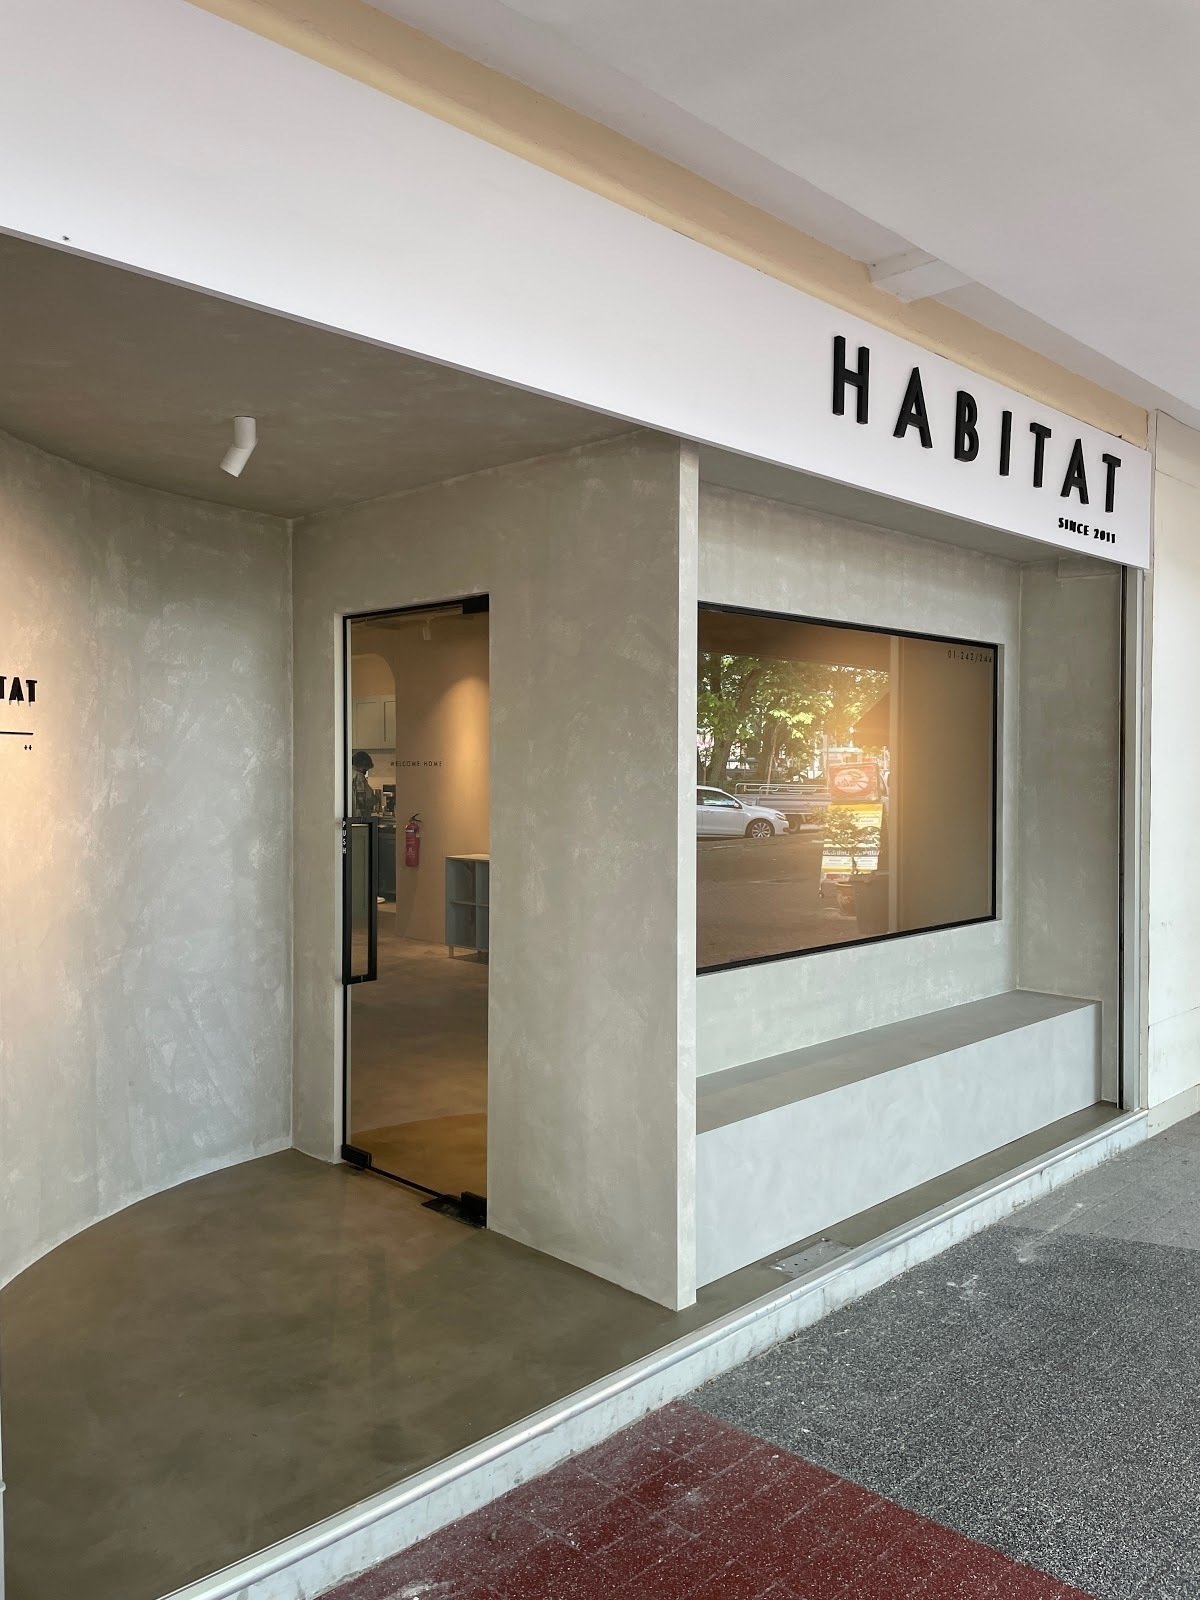 <span class="translation_missing" title="translation missing: en.meta.location_title, location_name: Habitat Coffee, city: Singapore">Location Title</span>